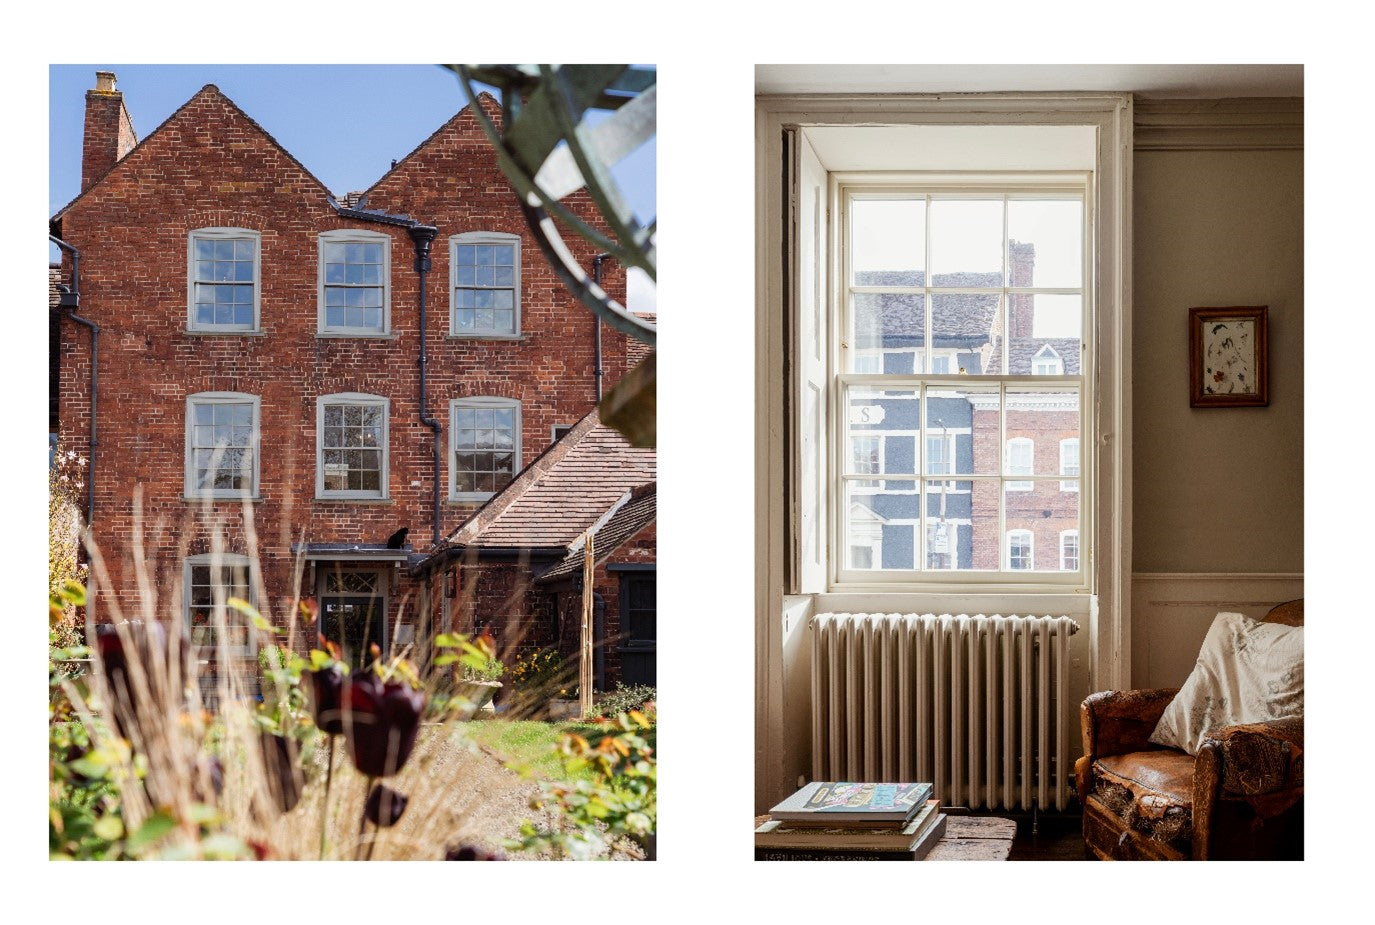 Sash windows on a red brick period property from the exterior (left) and interior (right) views.